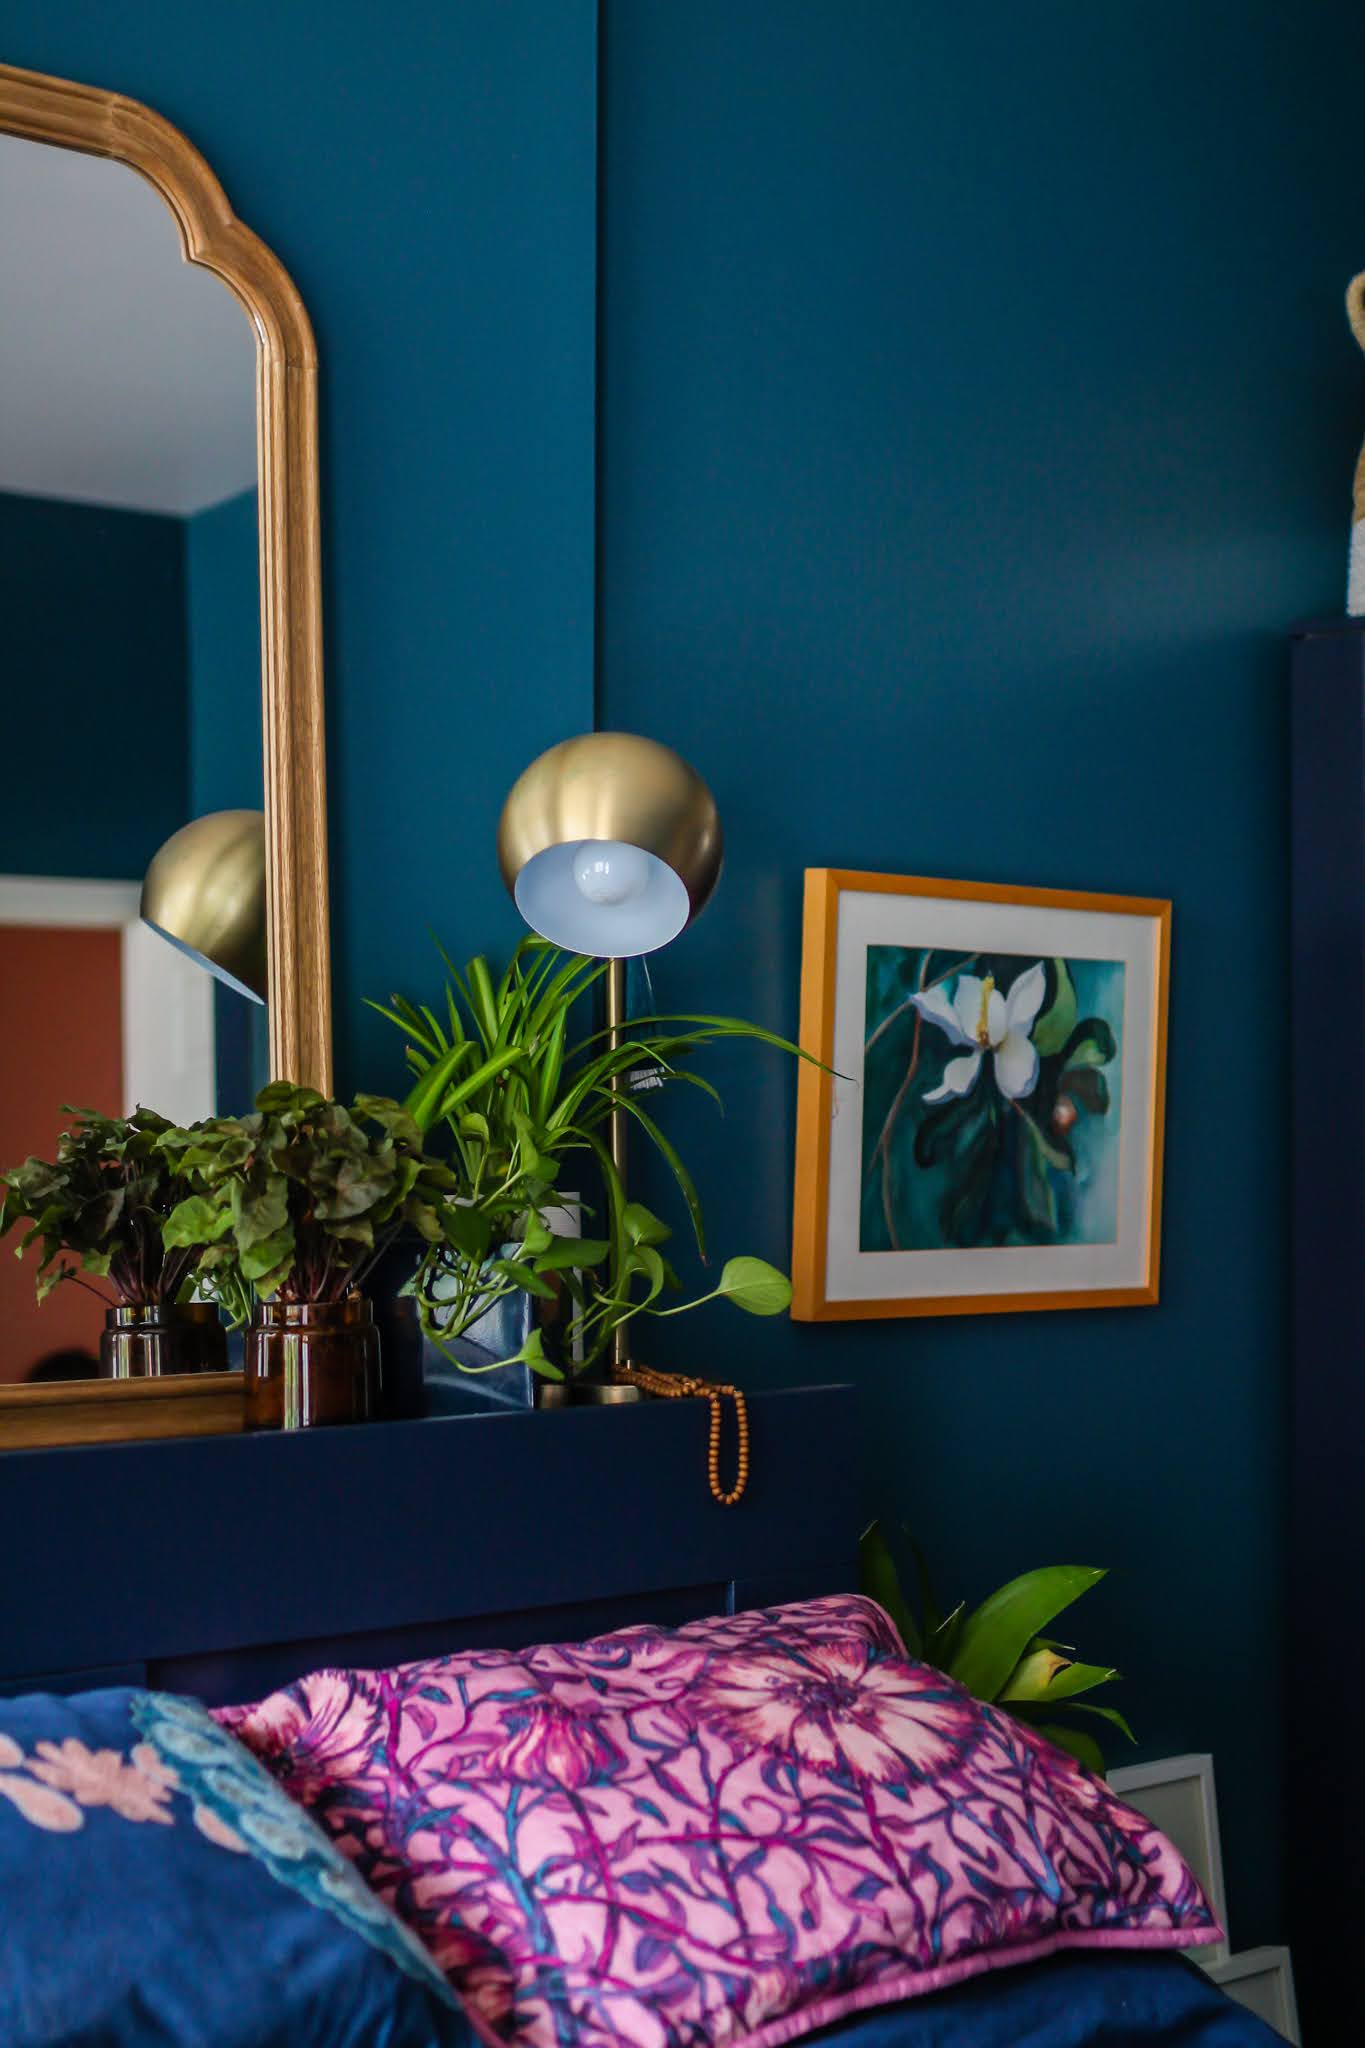 Clare Deep Dive Paint // Clare Goodnight Moon Paint //  Teal Bedroom // Navy Furniture // Green Blue Wall Paint // Deep and Moody Bedroom Inspo // Dark Blue Bedroom Inspo // Blue Bedroom Ideas // Teal Bedroom Ideas // Jeweltone Bedrooms // Jeweltone Bedroom Inspiration // Jeweltone Bedroom Inspo // Boho Bedroom Ideas // Plant Filled Bedroom // How To Paint Ikea Furniture // Paint Your Ikea Brimnes Wardrobe // Ikea Brimnes Hack // Easy Ikea Hacks // Ikea Brimnes Bed Hack // Plants On Headboard // Plants near bed // Plant filled decor // jungalow style  ideas // plants in bedroom